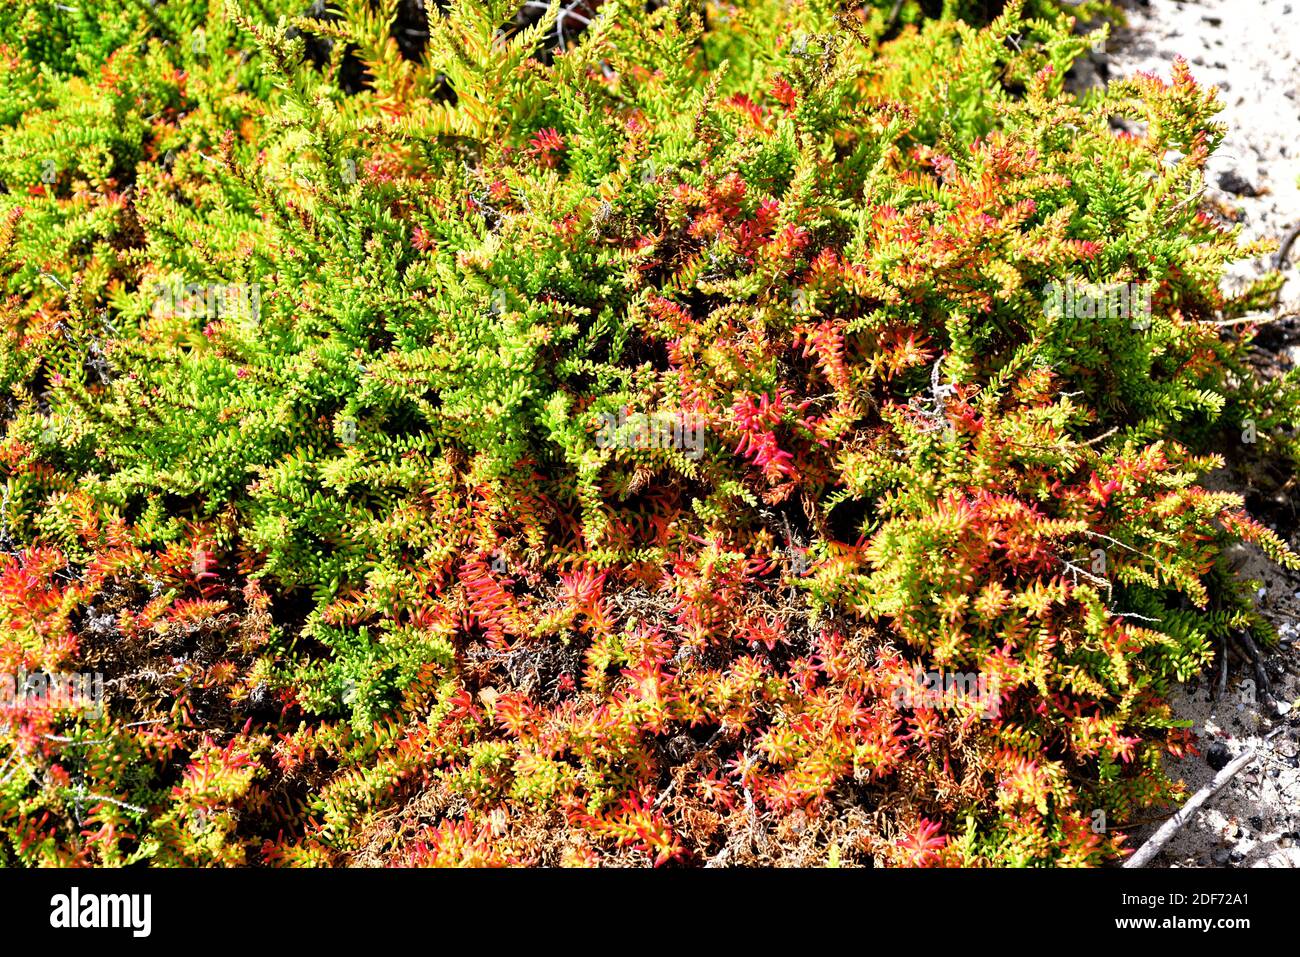 Alkali seepweed or shrubby sea-blite (Suaeda vera) is an halophyte succulent plant native to saline soils of Mediterranean Basin and Canary Islands. Stock Photo